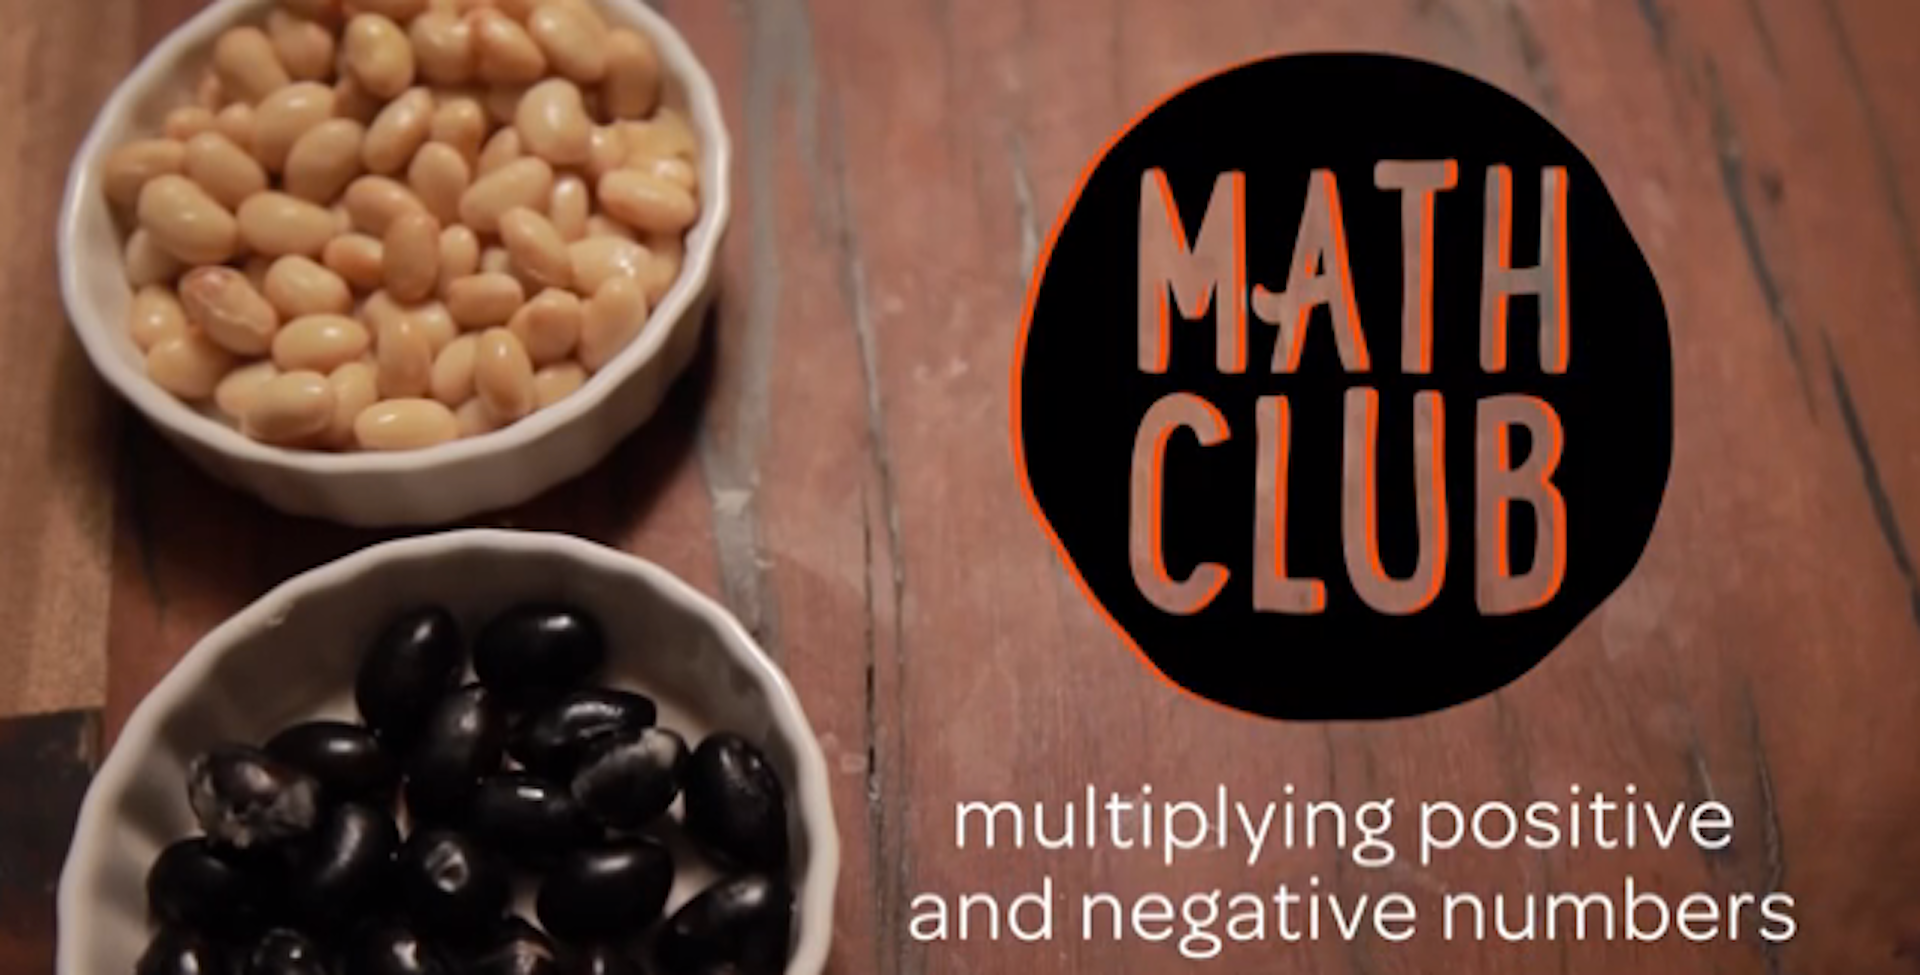 Two bowls of beans behind the words "Math Club" and "multiplying positive and negative numbers".